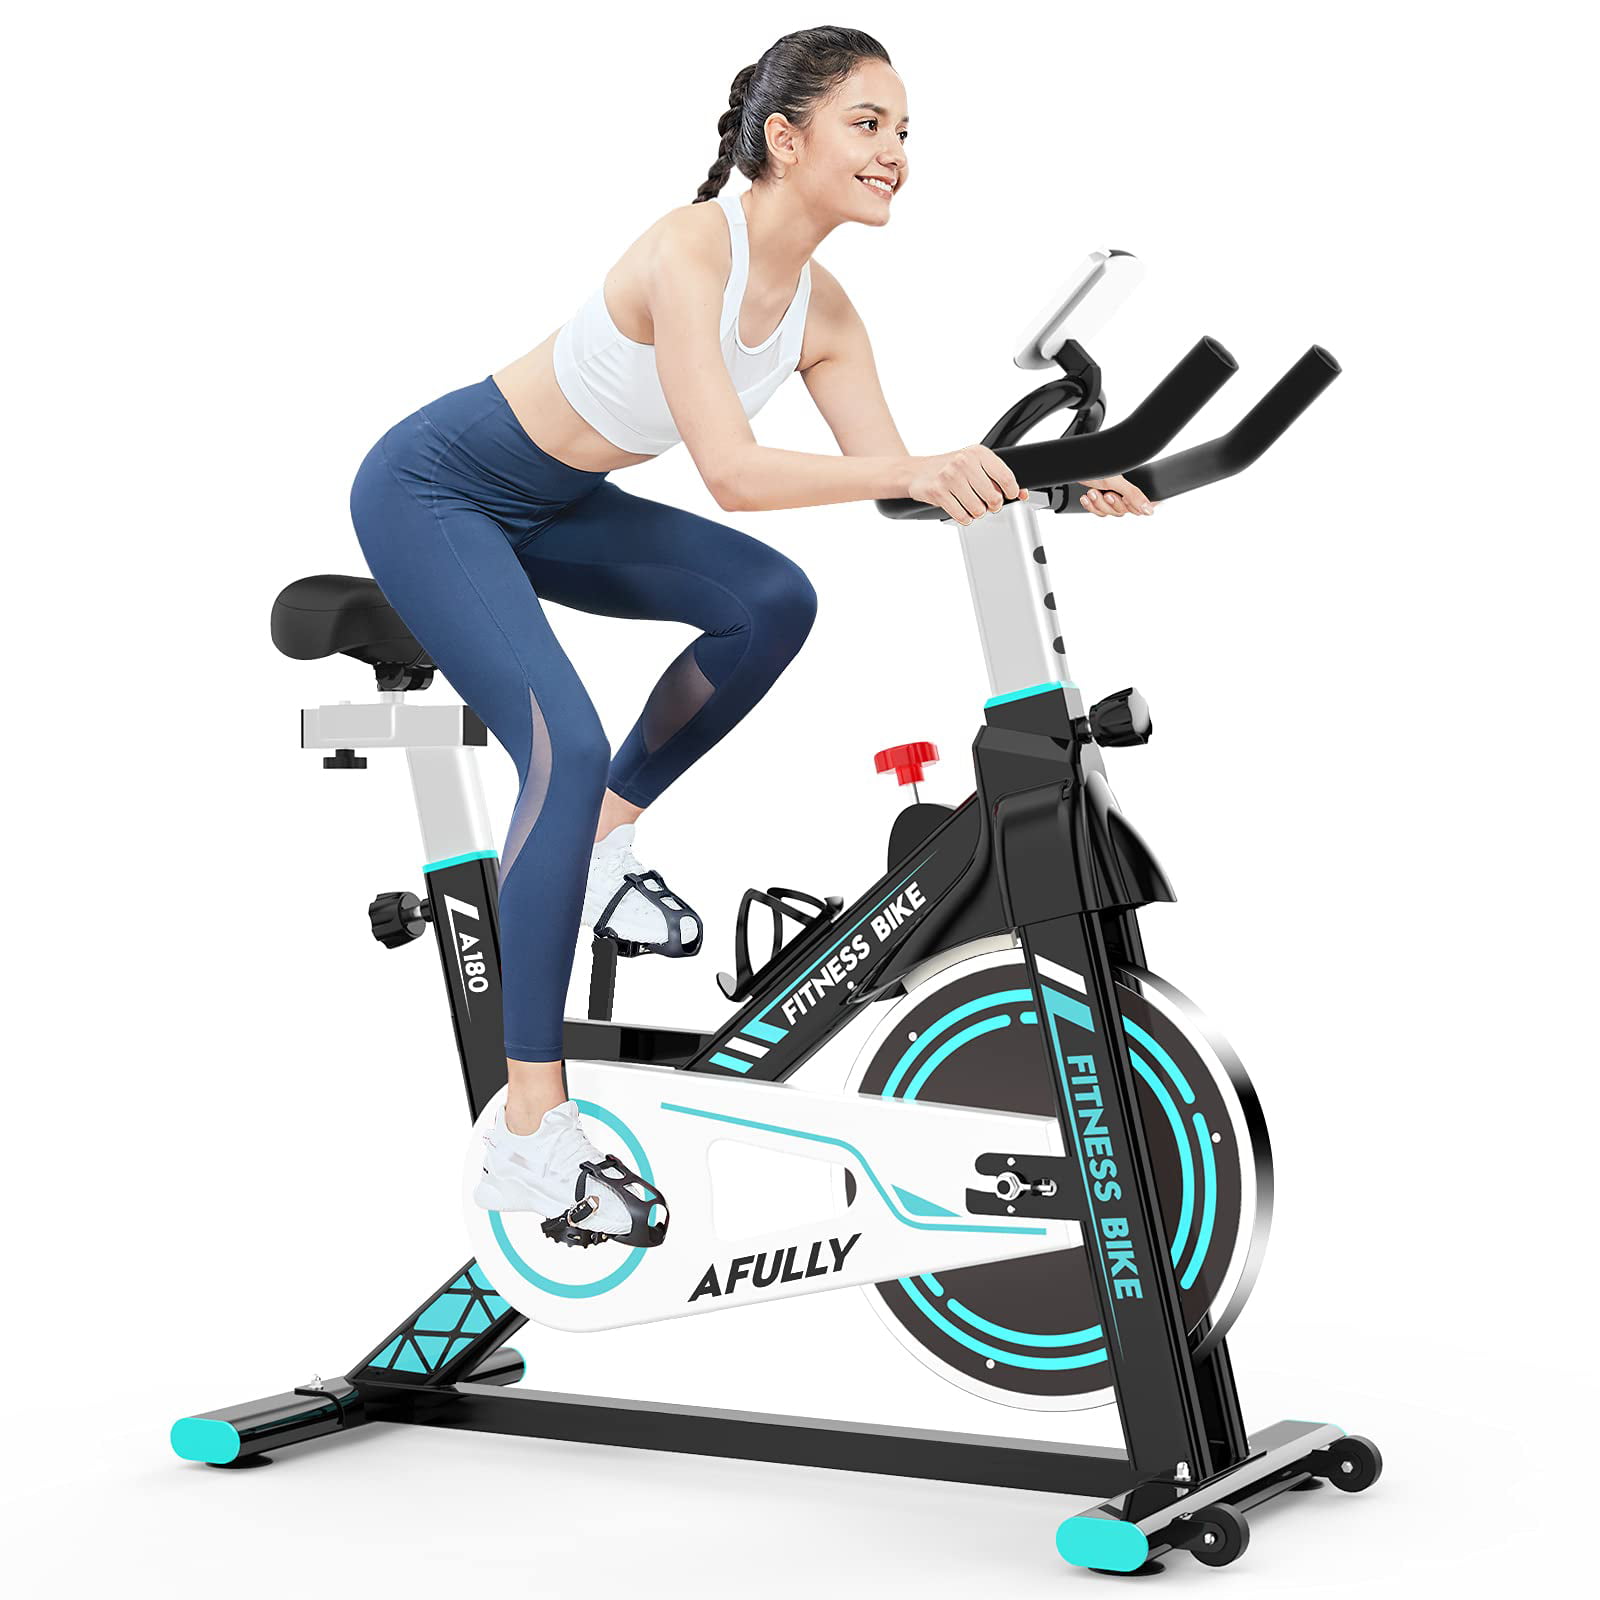 Details about   Pooboo Indoor Exercise Bike Stationary Cycling Bicycle Cardio Fitness Workout 